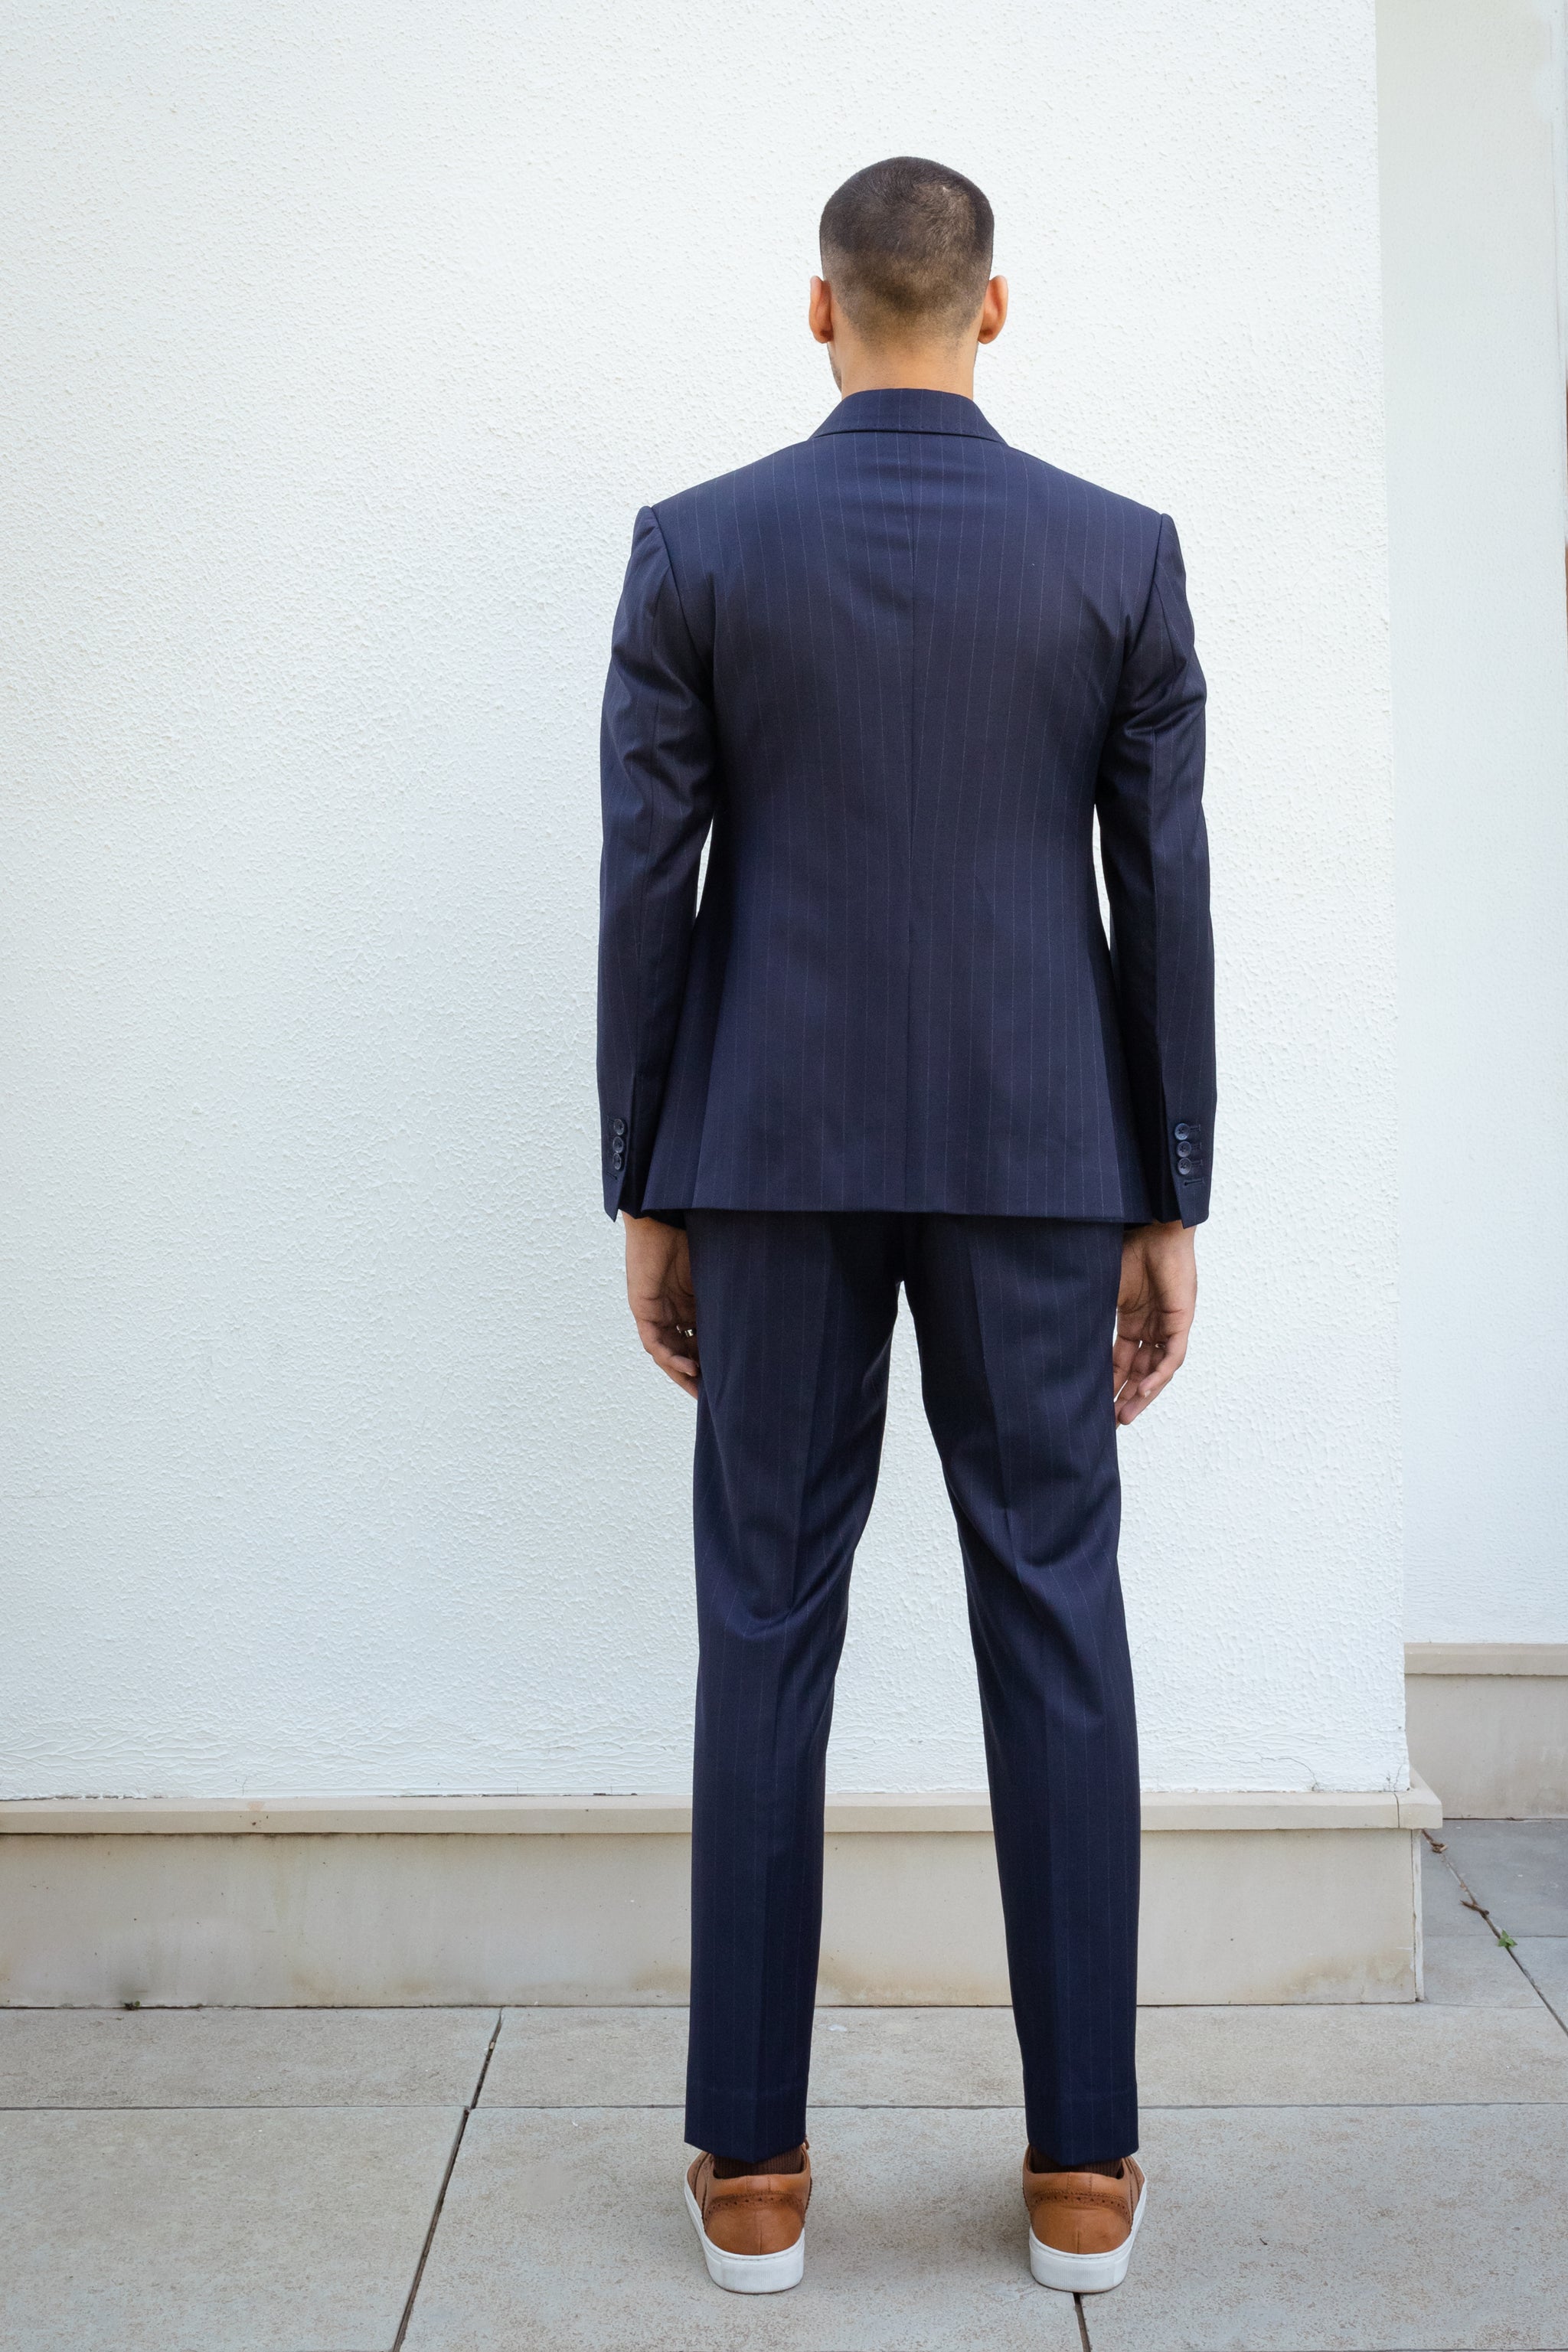 Navy Pinstripe Three Piece Suit | Formal Menswear Classy Style | Giorgenti  New York | Blue suit outfit, Blue suit men, Shiny navy blue suit